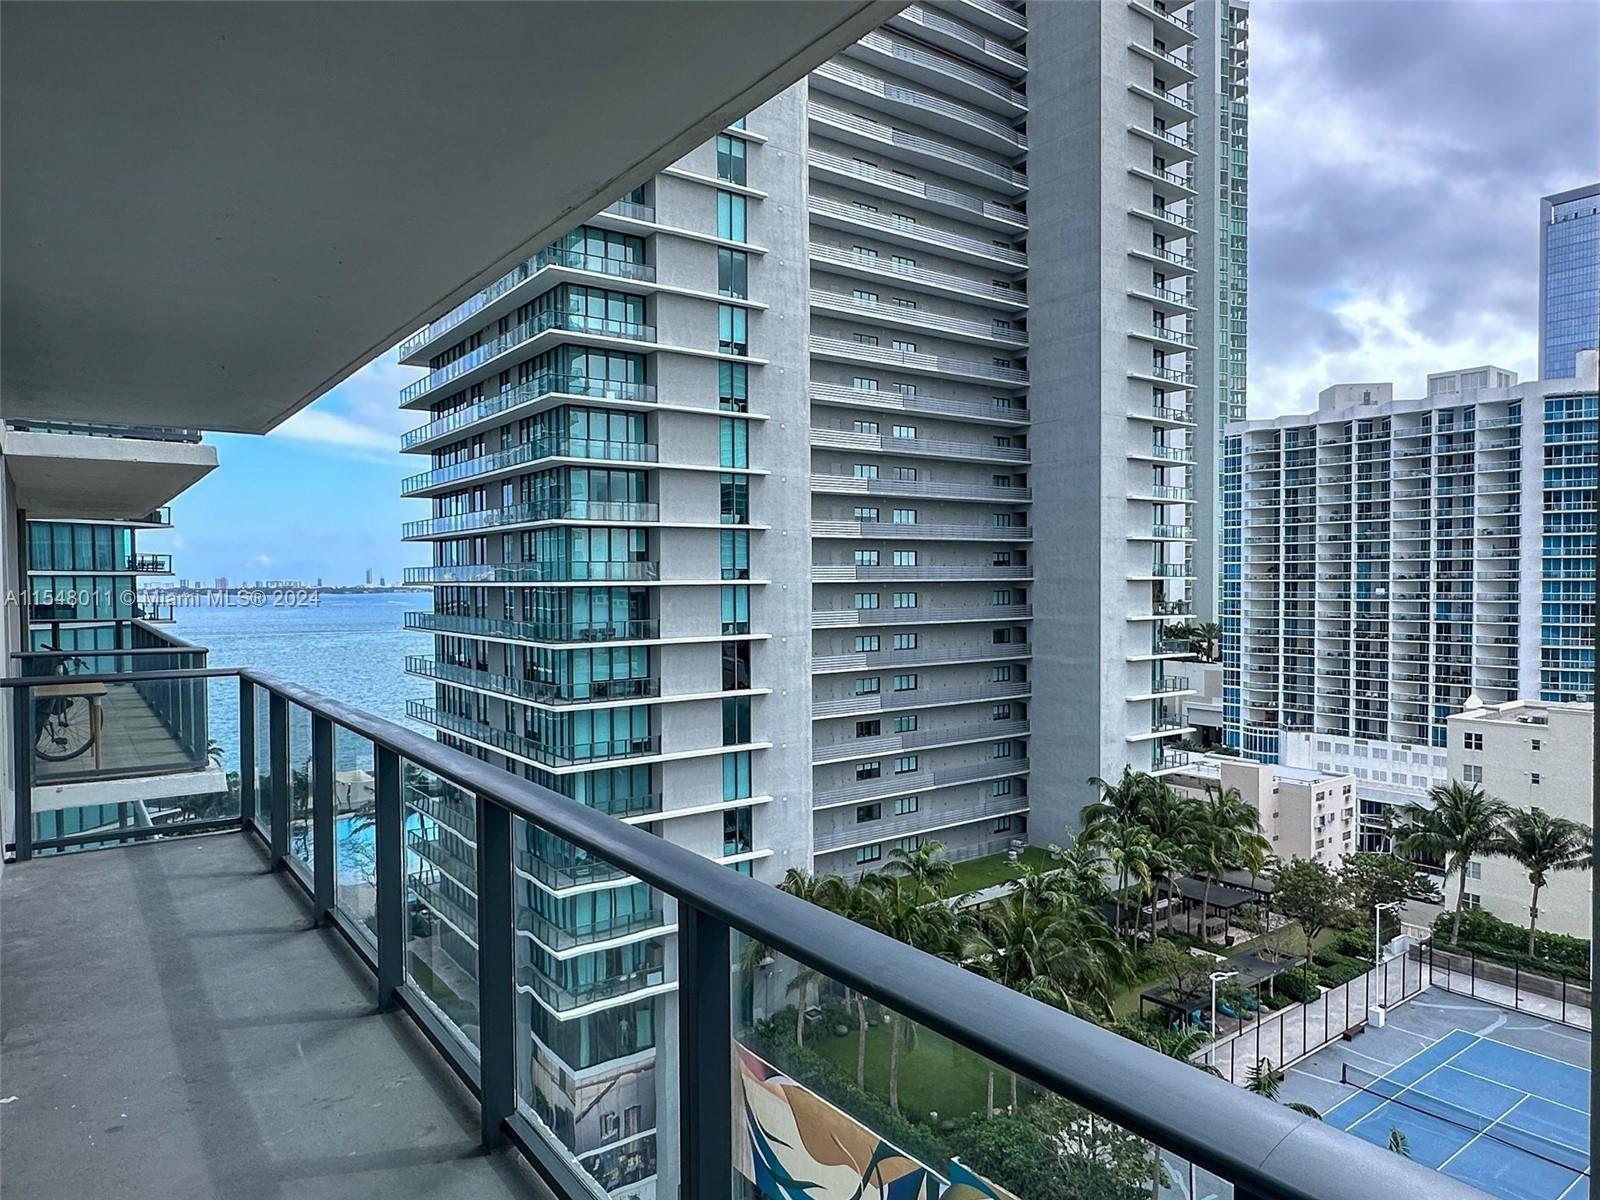 Soak in the SUN-Breathe the Bay & Ocean Water breeze in this Chic Lux 1 Bed 1.5 Bath + DEN, annual RENTAL @Paraiso Bayviews Miami - New Modern White & grey Stone Wash flooring. Lux BOSCH stainless steel appliances. Enjoy your 132 SF Terrace!• Prime location in Miami's Edgewater district - • Energy-efficient, tinted, impact-resistant floor-to-ceiling sliding glass doors • Bay Views to Biscayne Bay & Miami Beach Stunning landmark architecture • Pedestrian-friendly street-front • 24-hour welcome desk with concierge • 24-hour guest valet • 24-hour access control • Resort-Style Rooftop Pool • Luxury Health spa with sauna, steam room • Club room • Complete fitted out gym & spa • Lush landscape w/interactive fountains • Kids Room • Theater Room • Billiards Room • Tennis courts